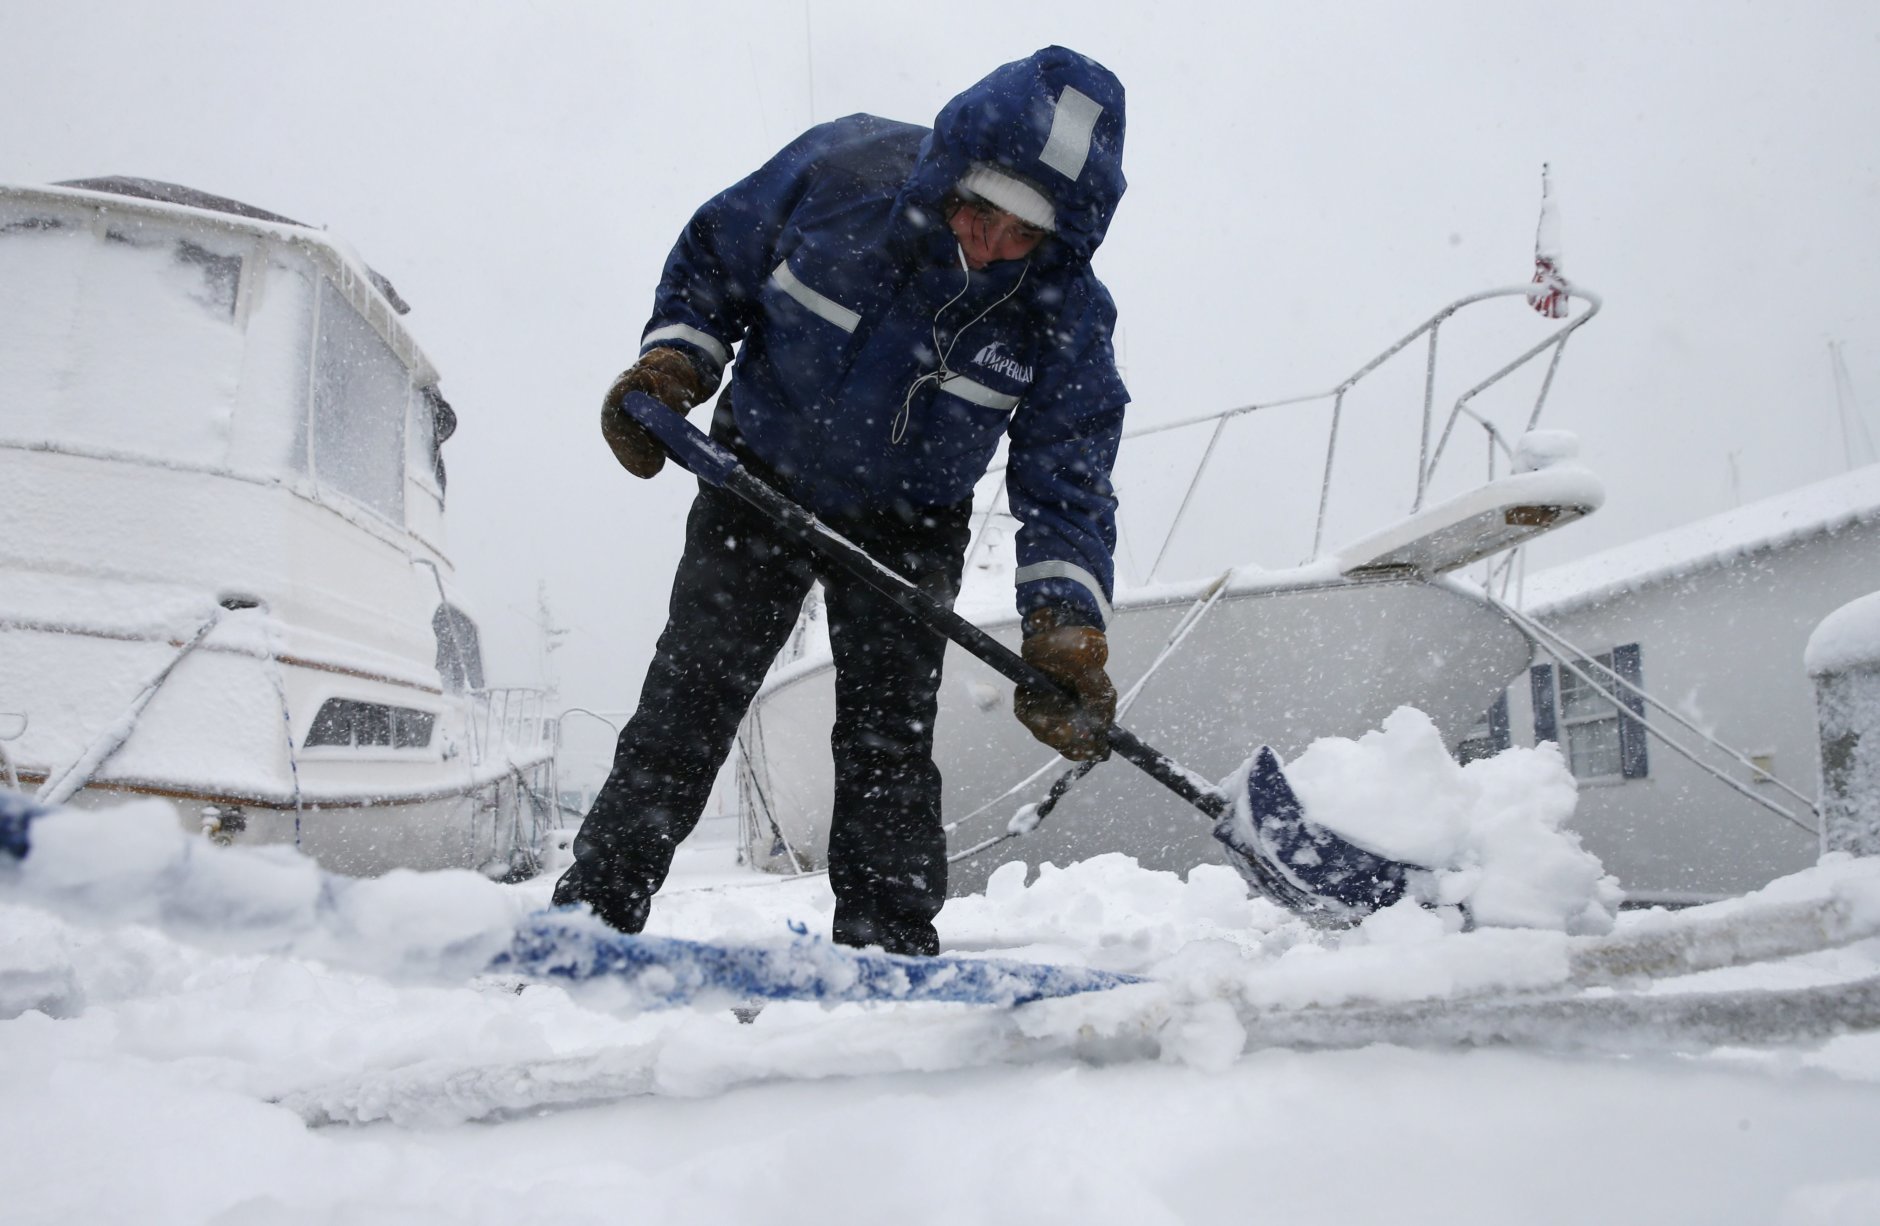 Gray Harrington clears snow from a dock at the Boston Harbor Shipyard and Marina in Boston, Tuesday, March 13, 2018. Boston finds itself in the bullseye of the third nor'easter in two weeks, with forecasters warning of up to 18 inches of snow and 2 feet or more to the south. (AP Photo/Michael Dwyer)